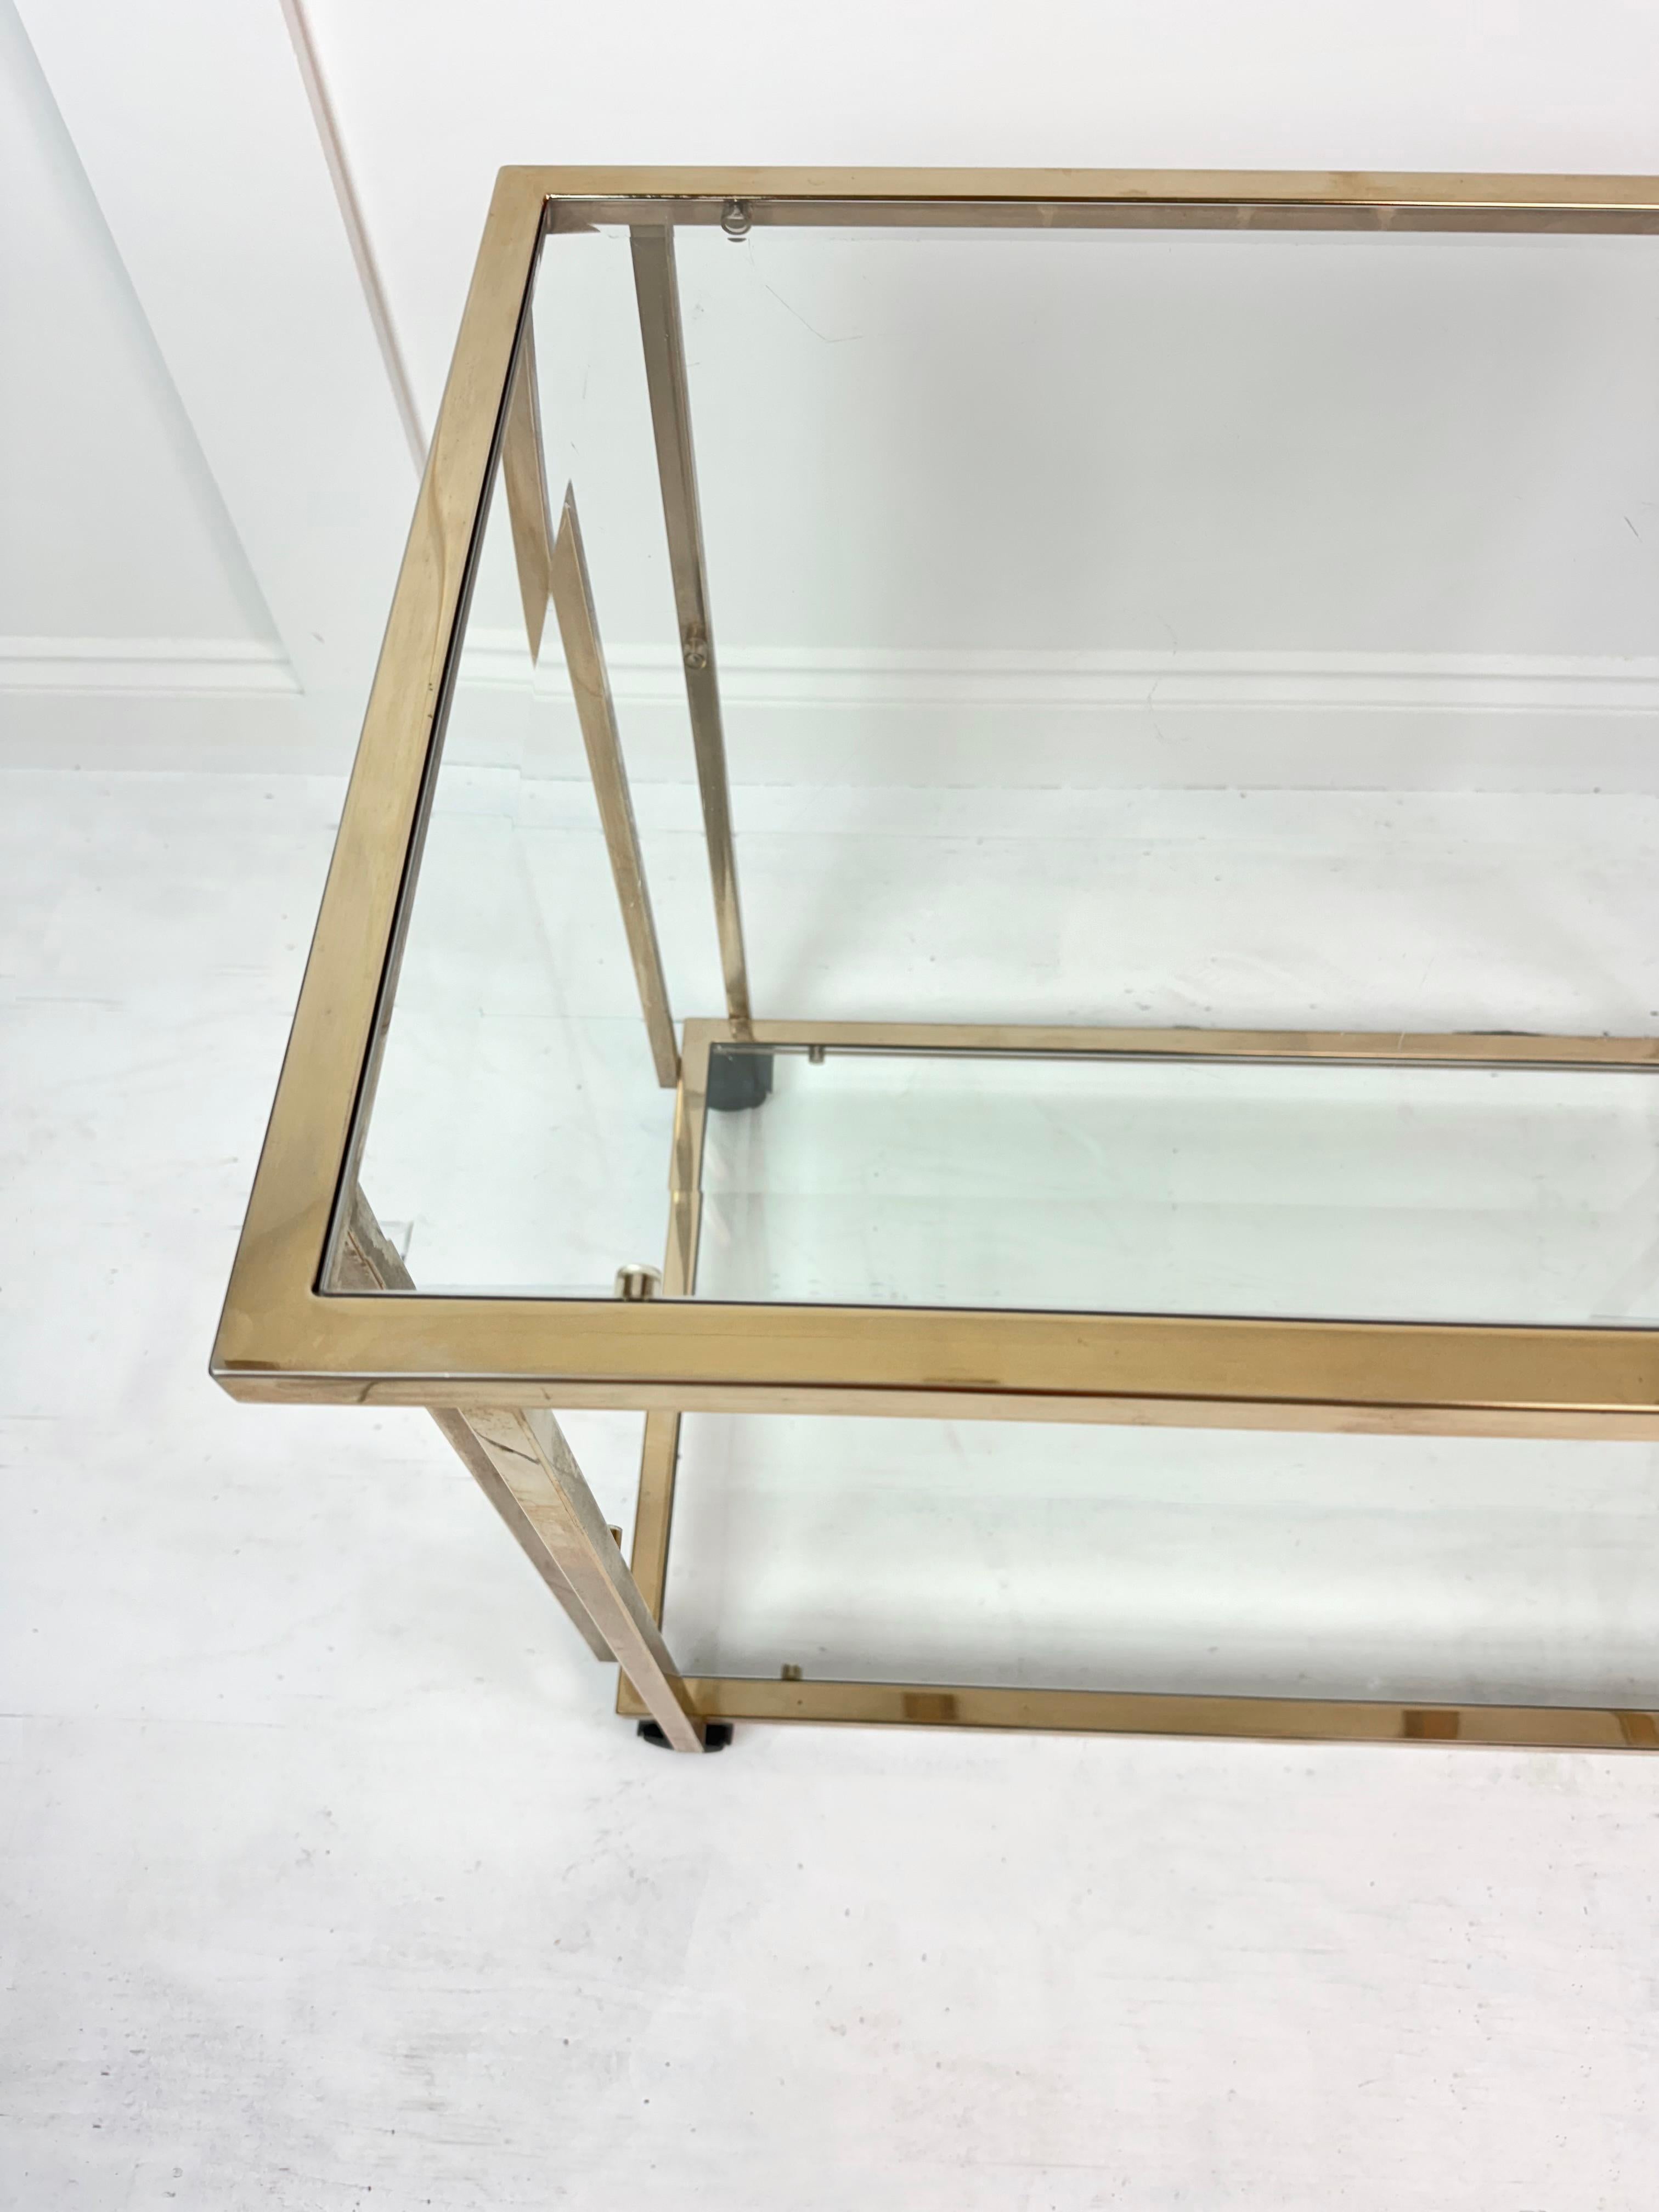 Late 20th Century Brass And Bevel Glass Top Drinks Trolley, Belgium c. 1980's For Sale